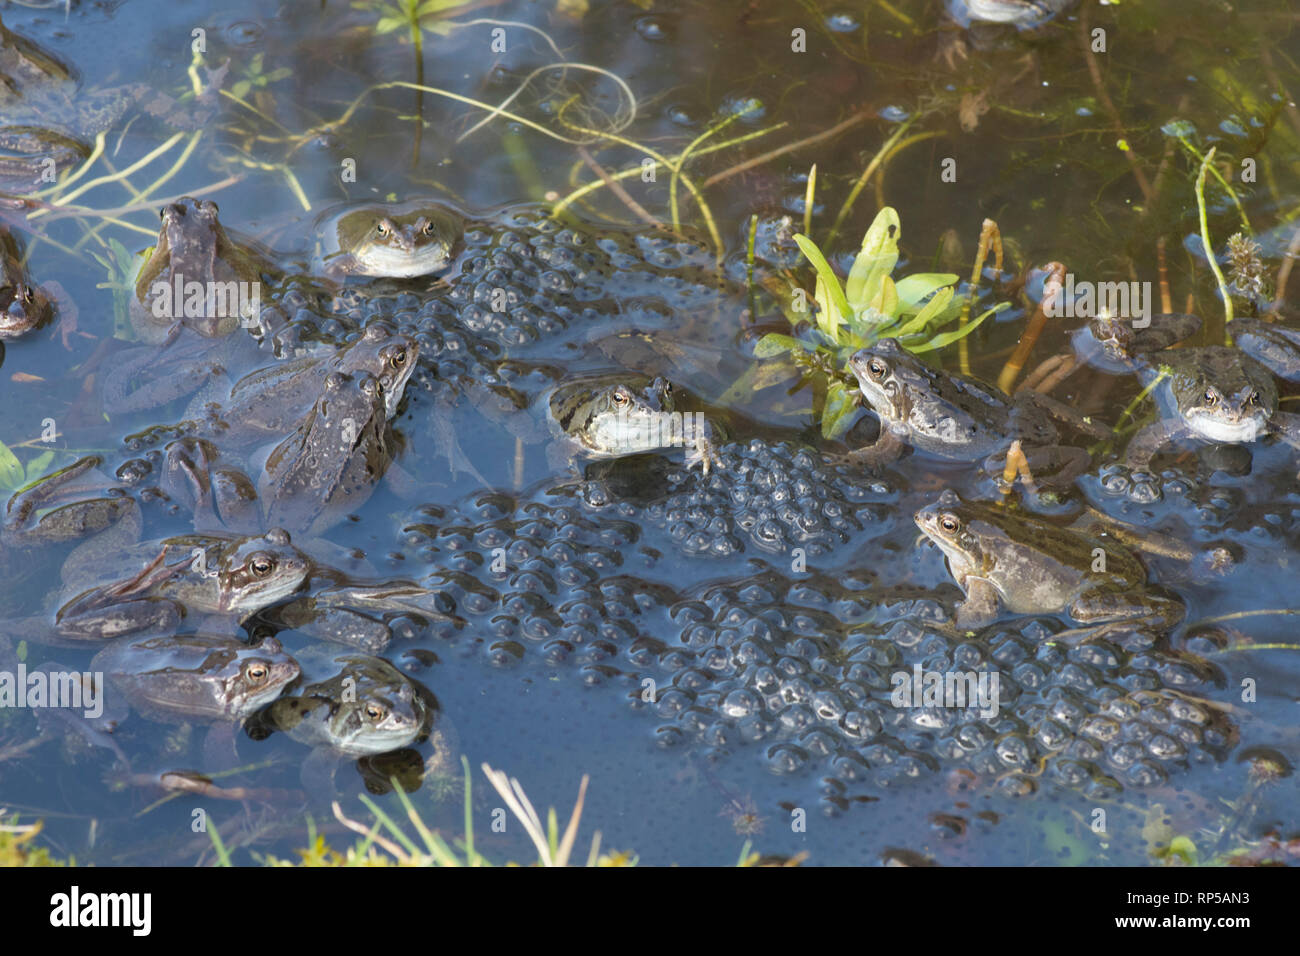 Common Frog, Rana temporaria, many males waiting on frog spawn in breeding pond for females to arrive for spawning, February, garden pond Stock Photo